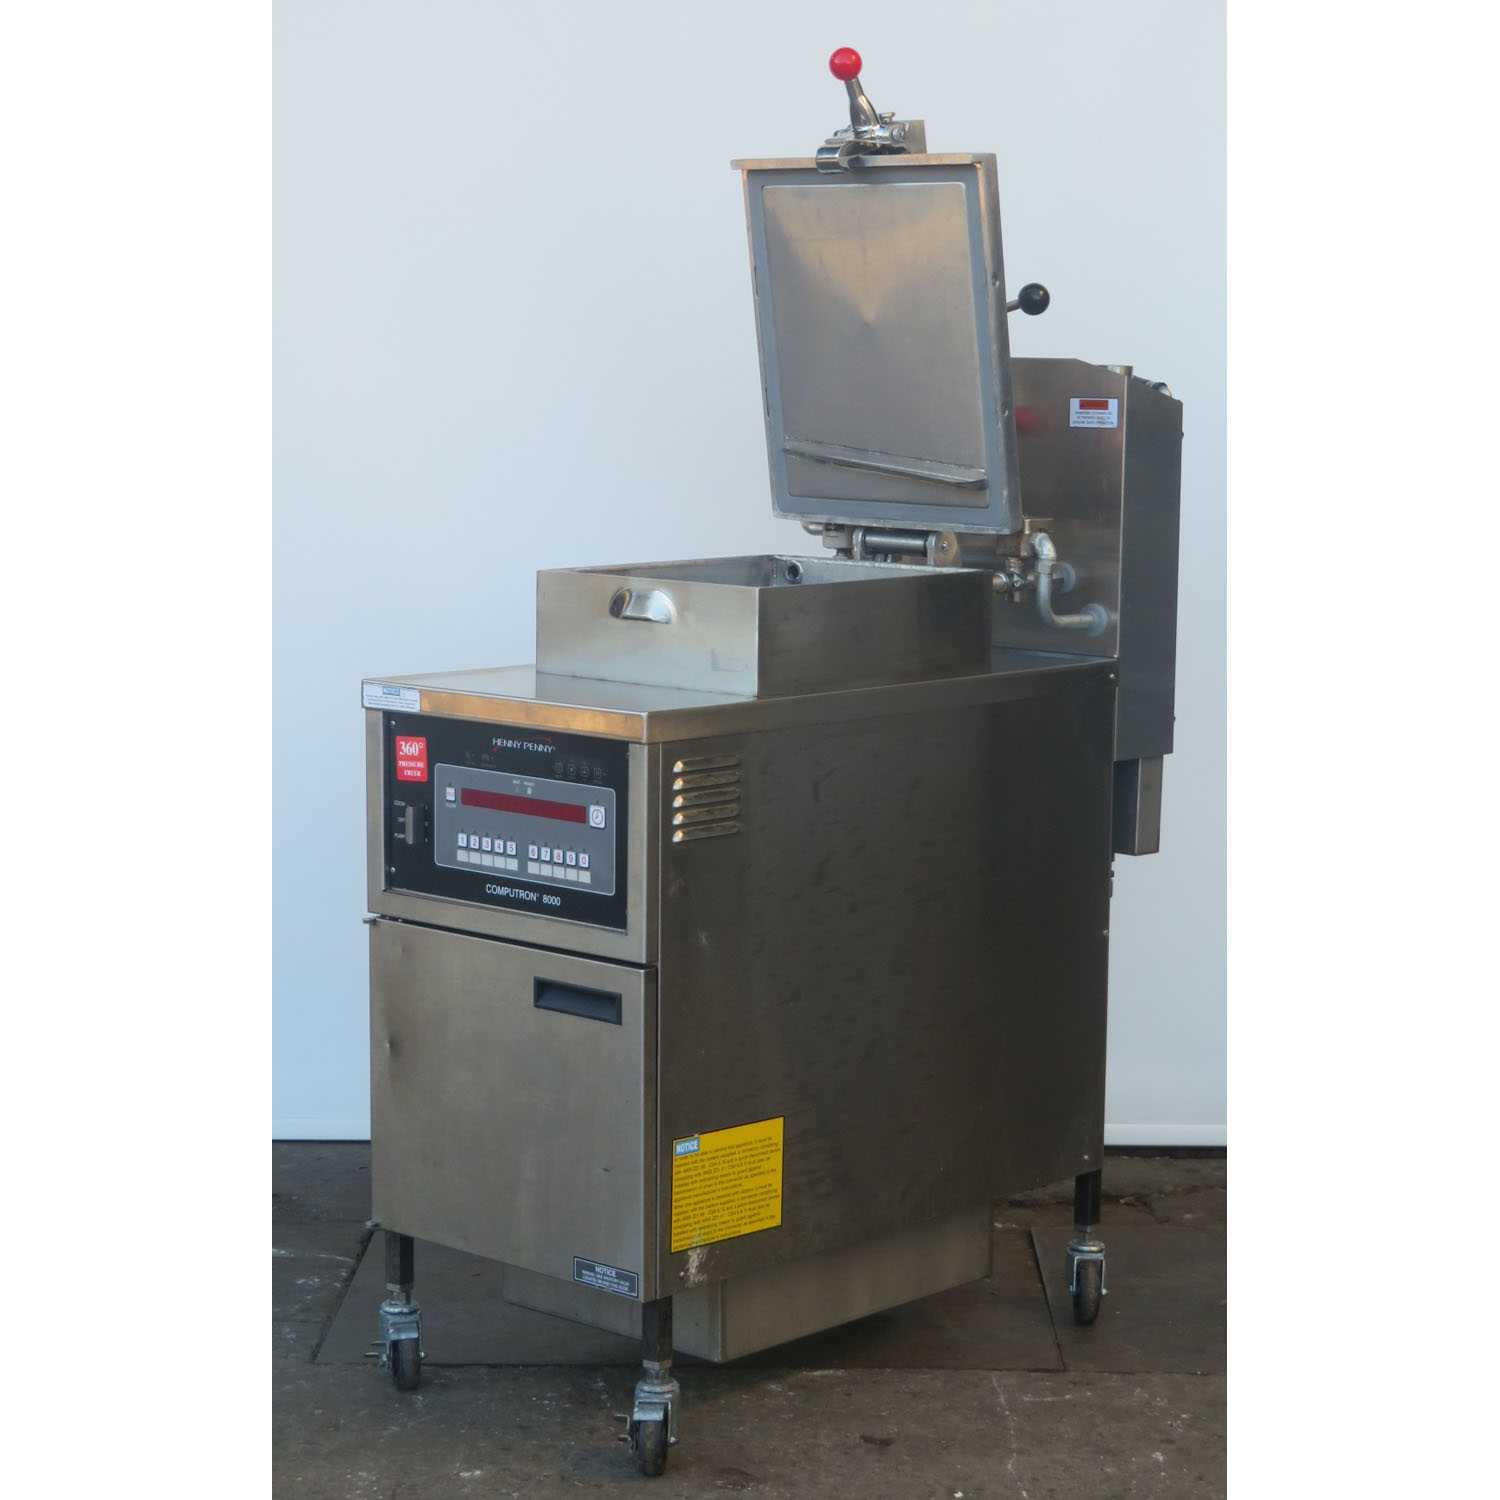 Henny Penny 600C Pressure Fryer, W/Filter System, Used Excellent Condition image 6